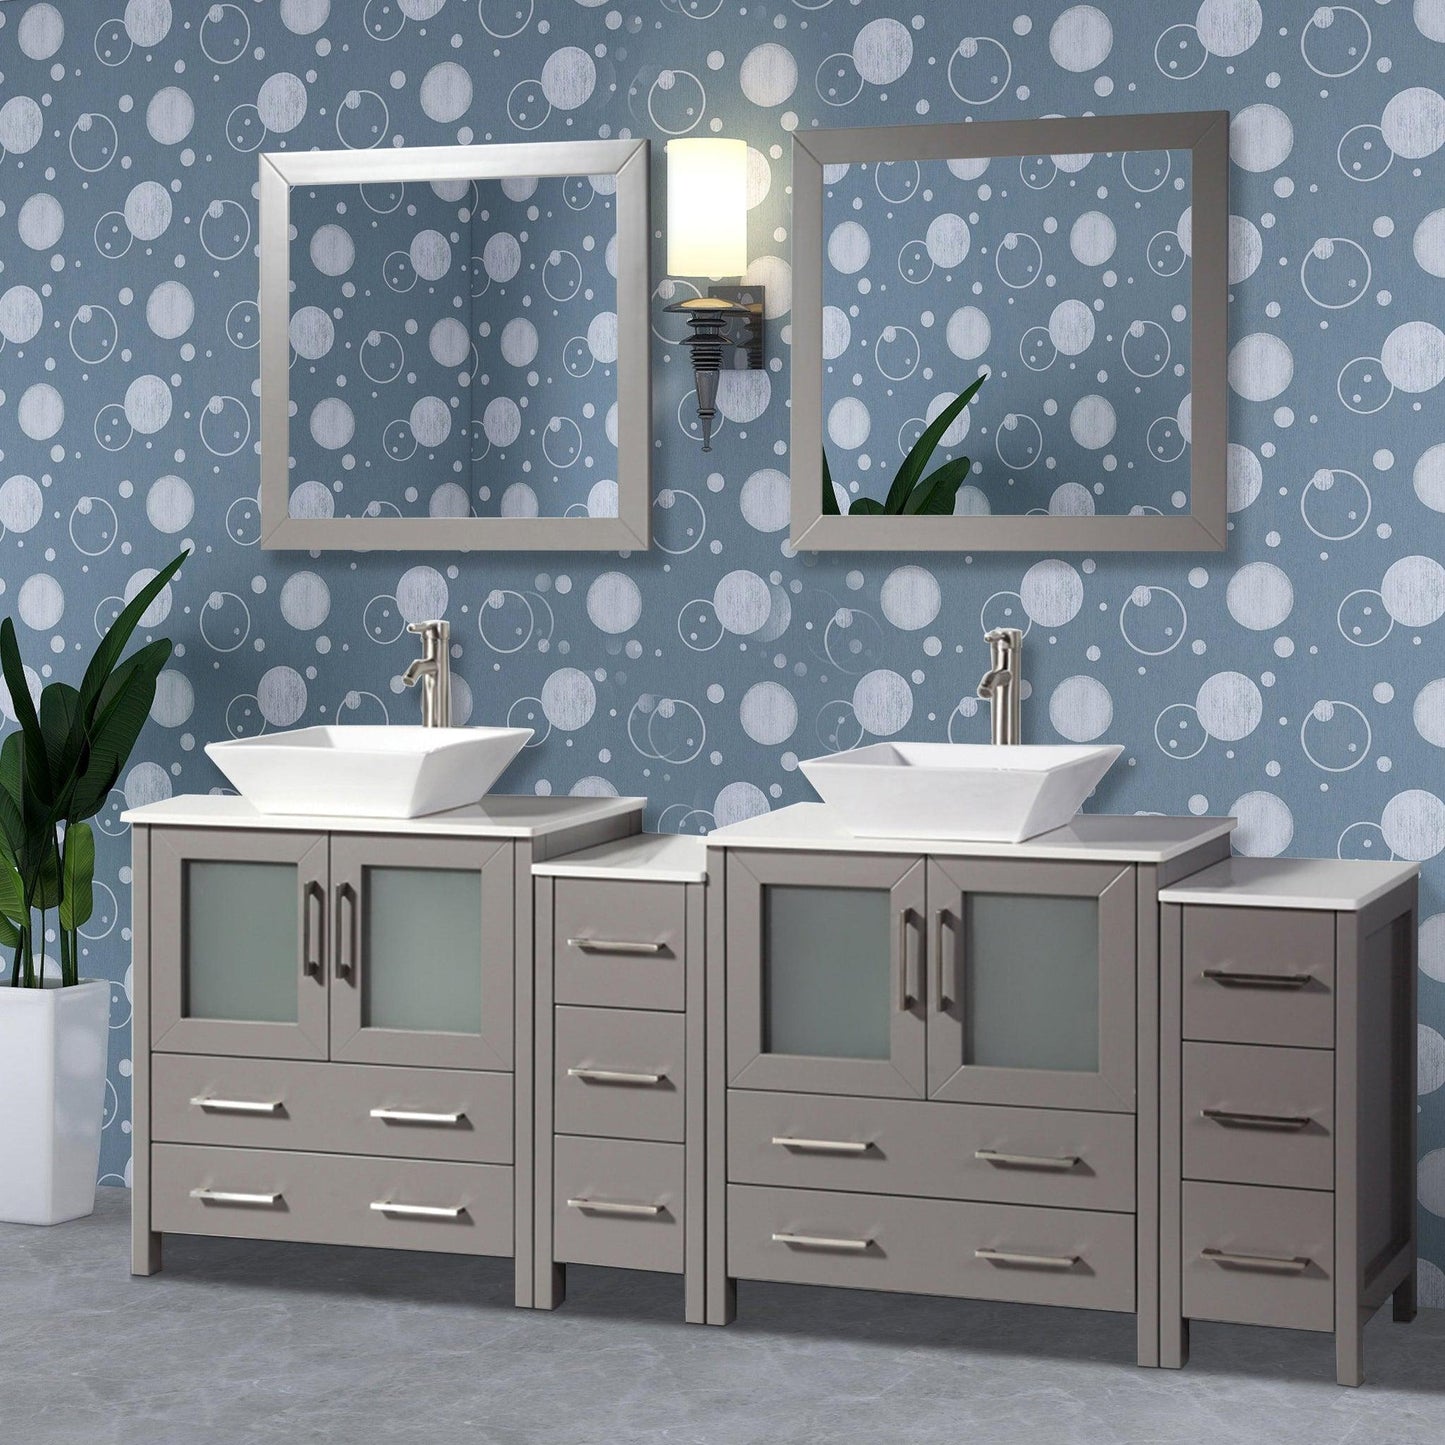 Vanity Art Ravenna 84" Double Gray Freestanding Vanity Set With White Engineered Marble Top, 2 Ceramic Vessel Sinks, 2 Side Cabinets and 2 Mirrors